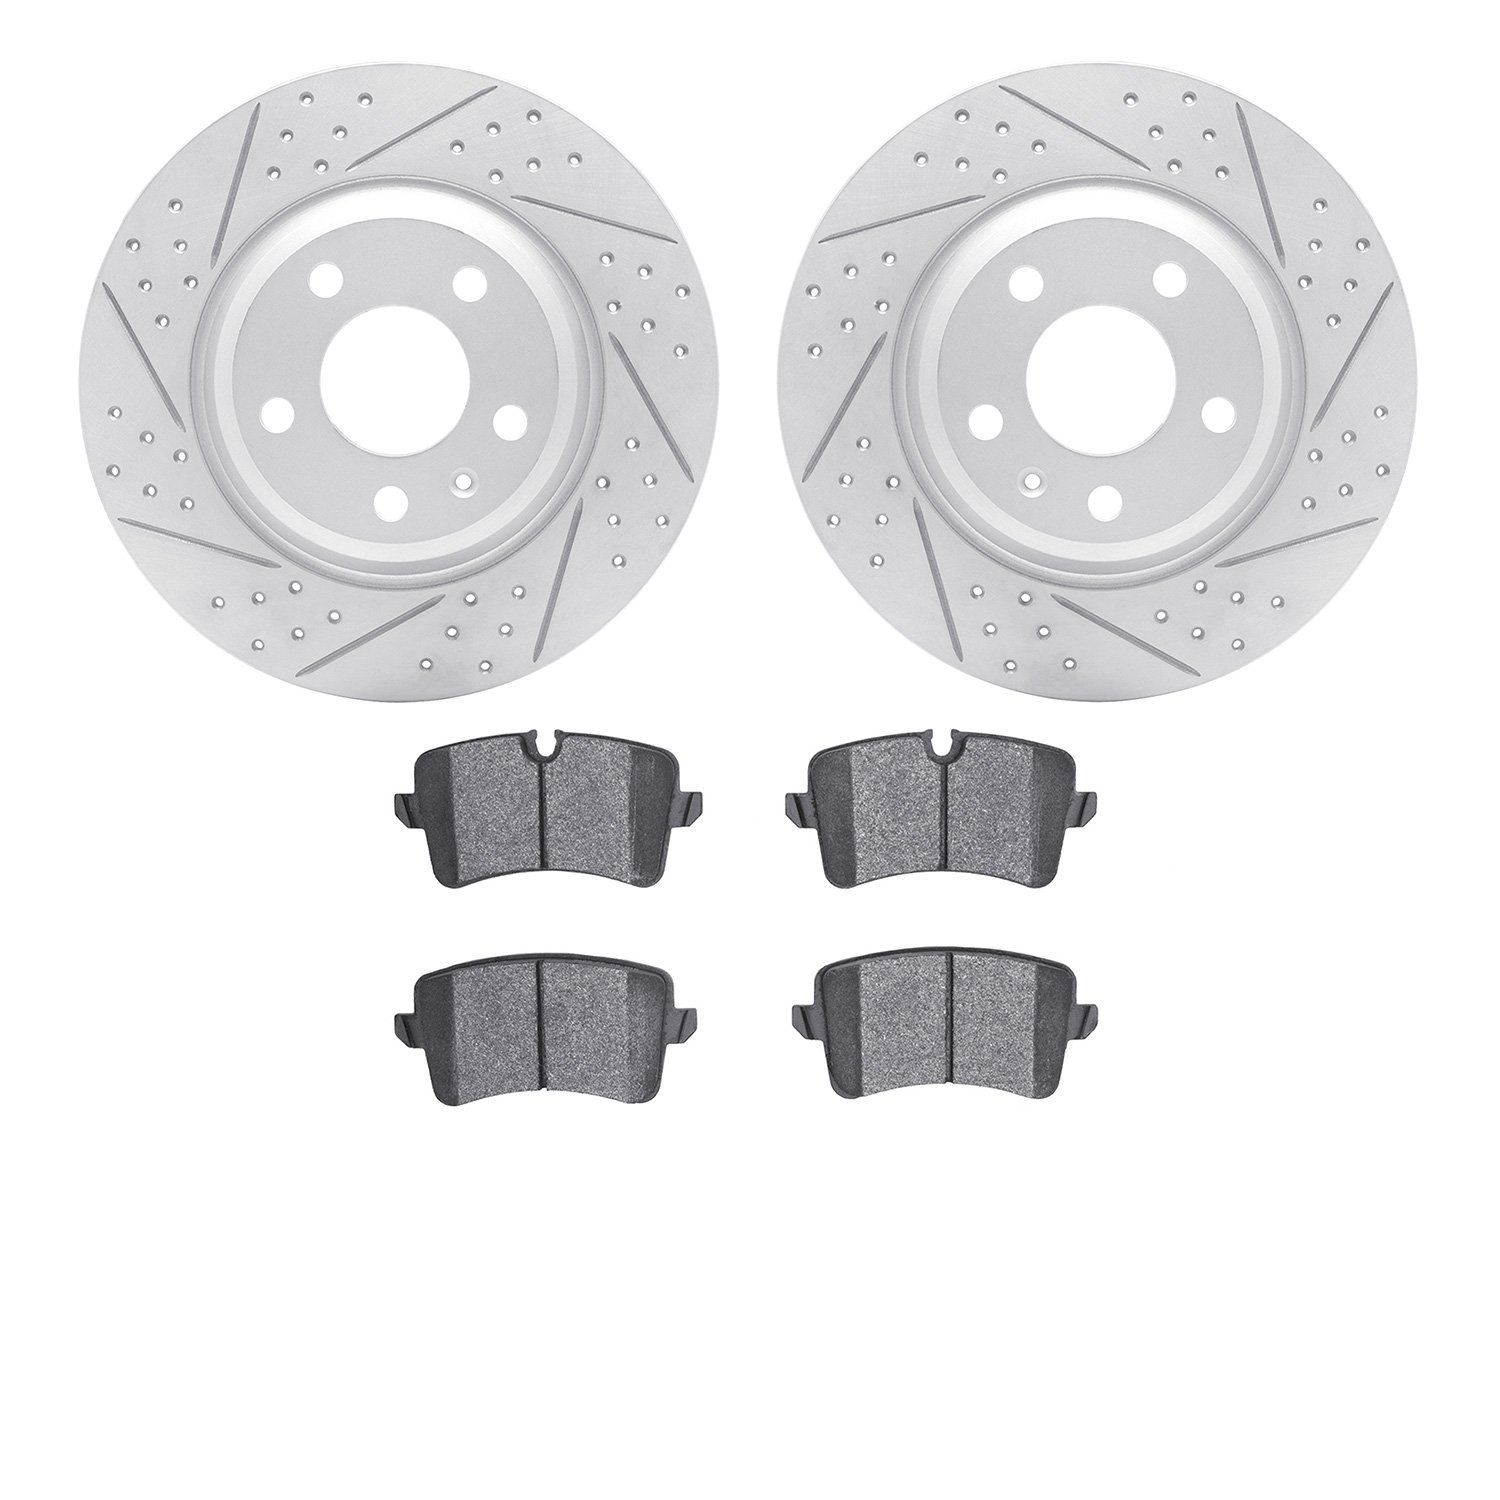 2502-73058 Geoperformance Drilled/Slotted Rotors w/5000 Advanced Brake Pads Kit, 2012-2013 Audi/Volkswagen, Position: Rear